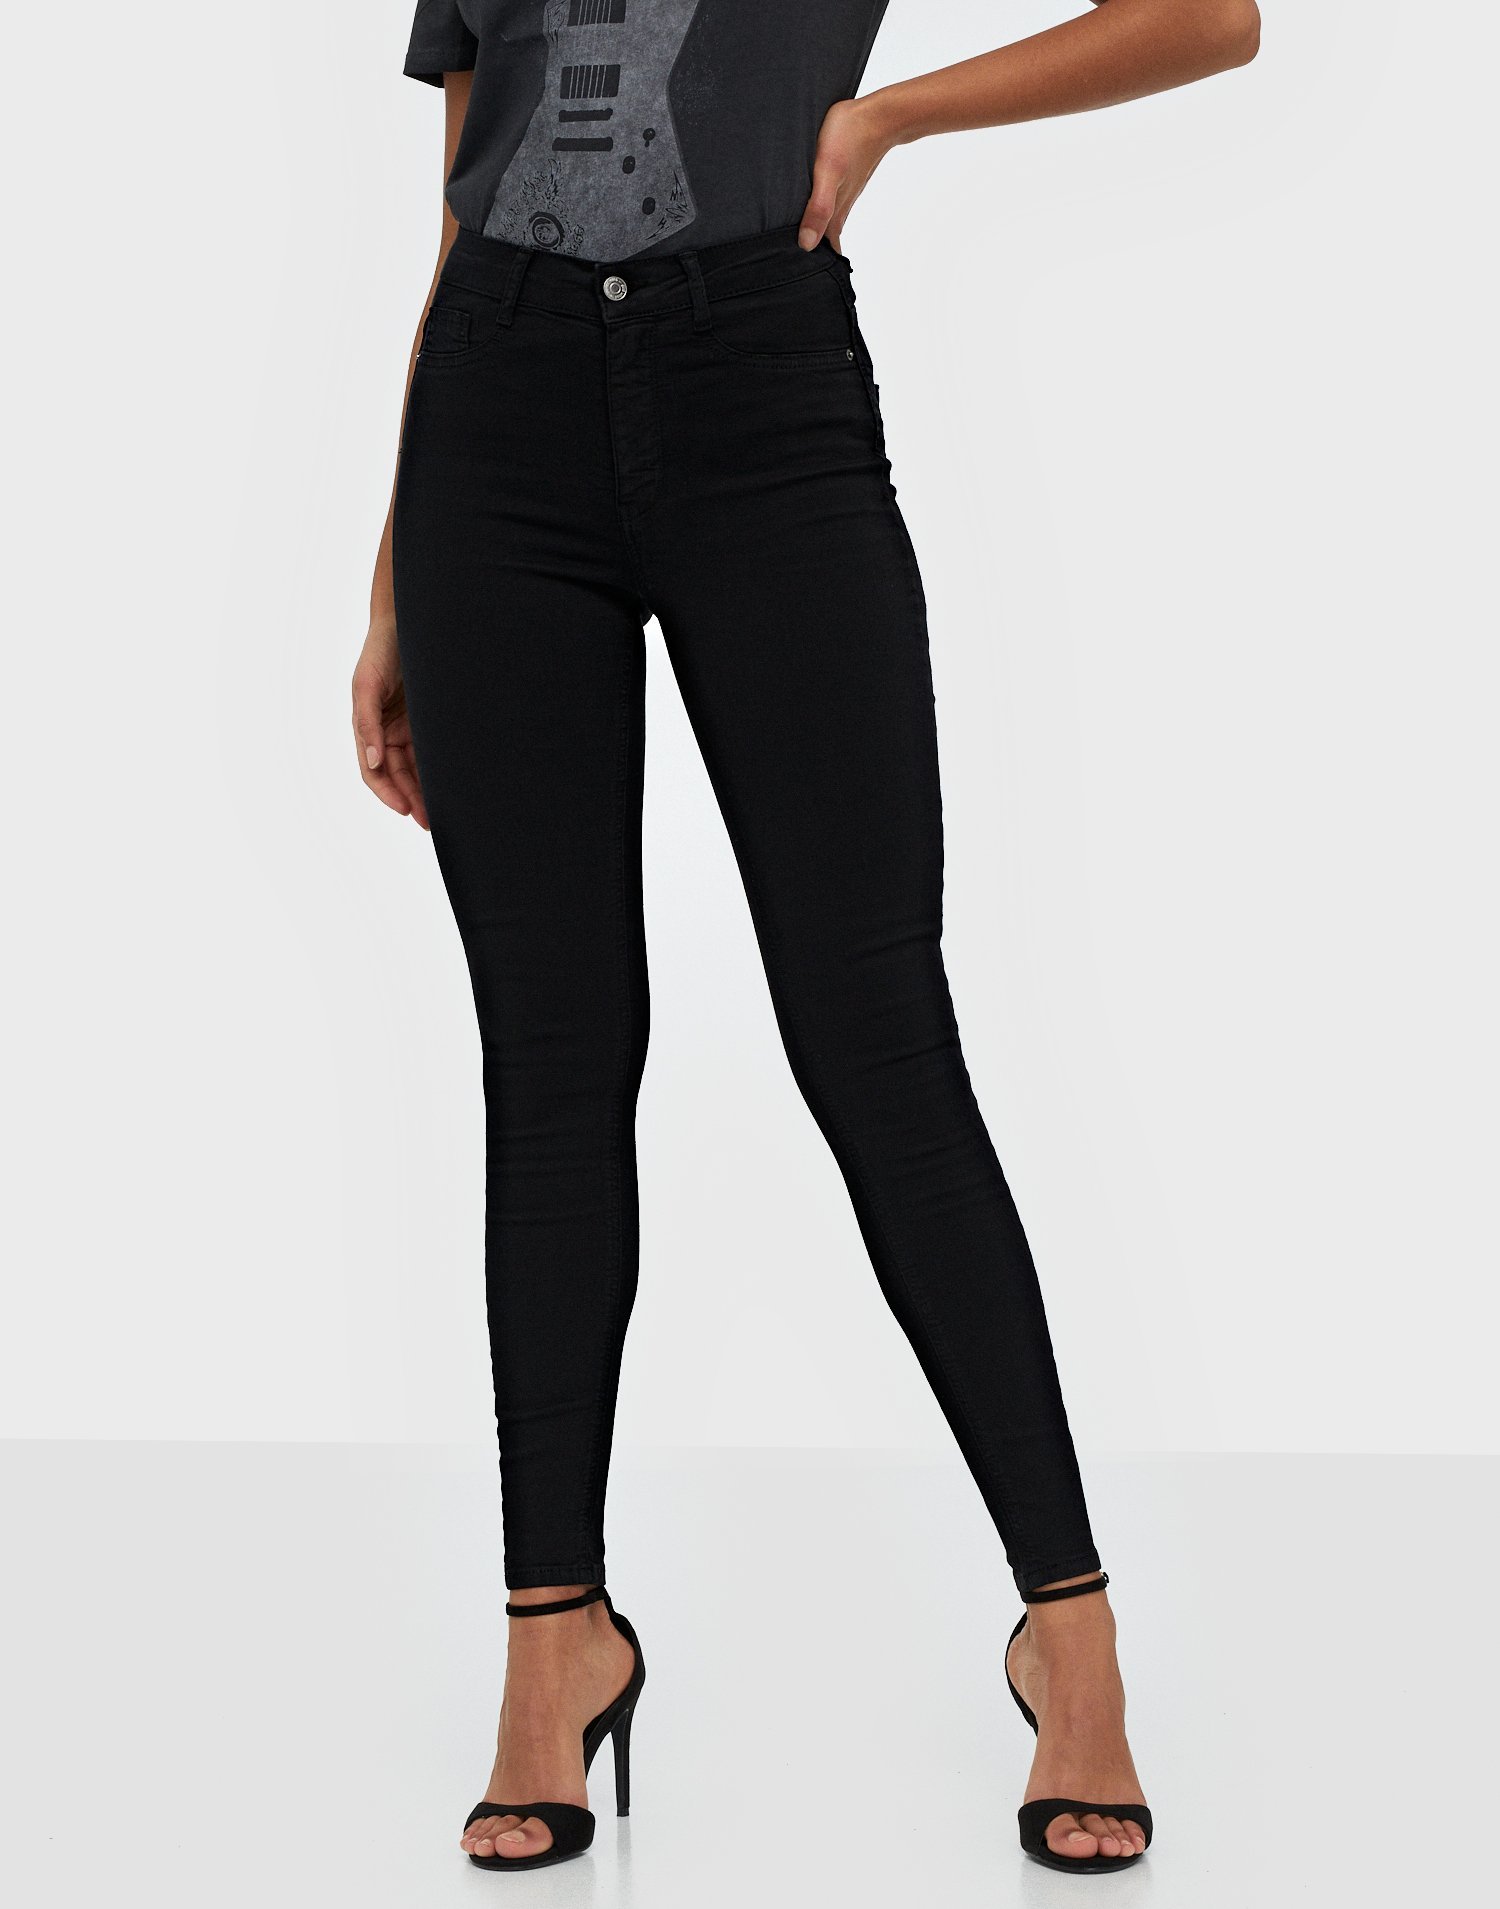 Shop Gina Tricot Molly High Waist Jeans Black Nelly Com